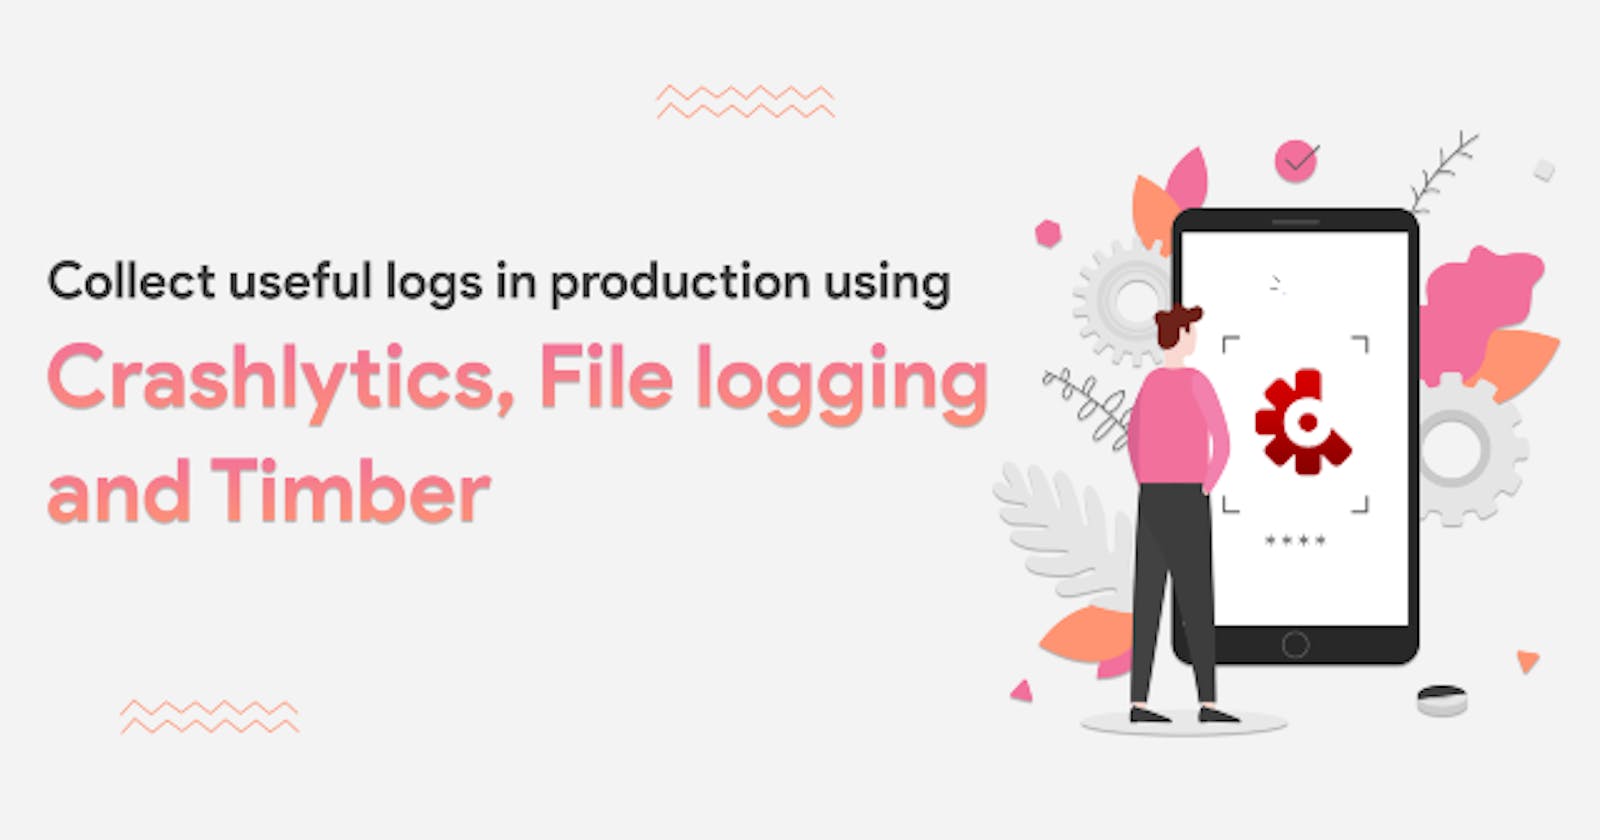 Collect useful logs in production using Crashlytics, File logging and Timber